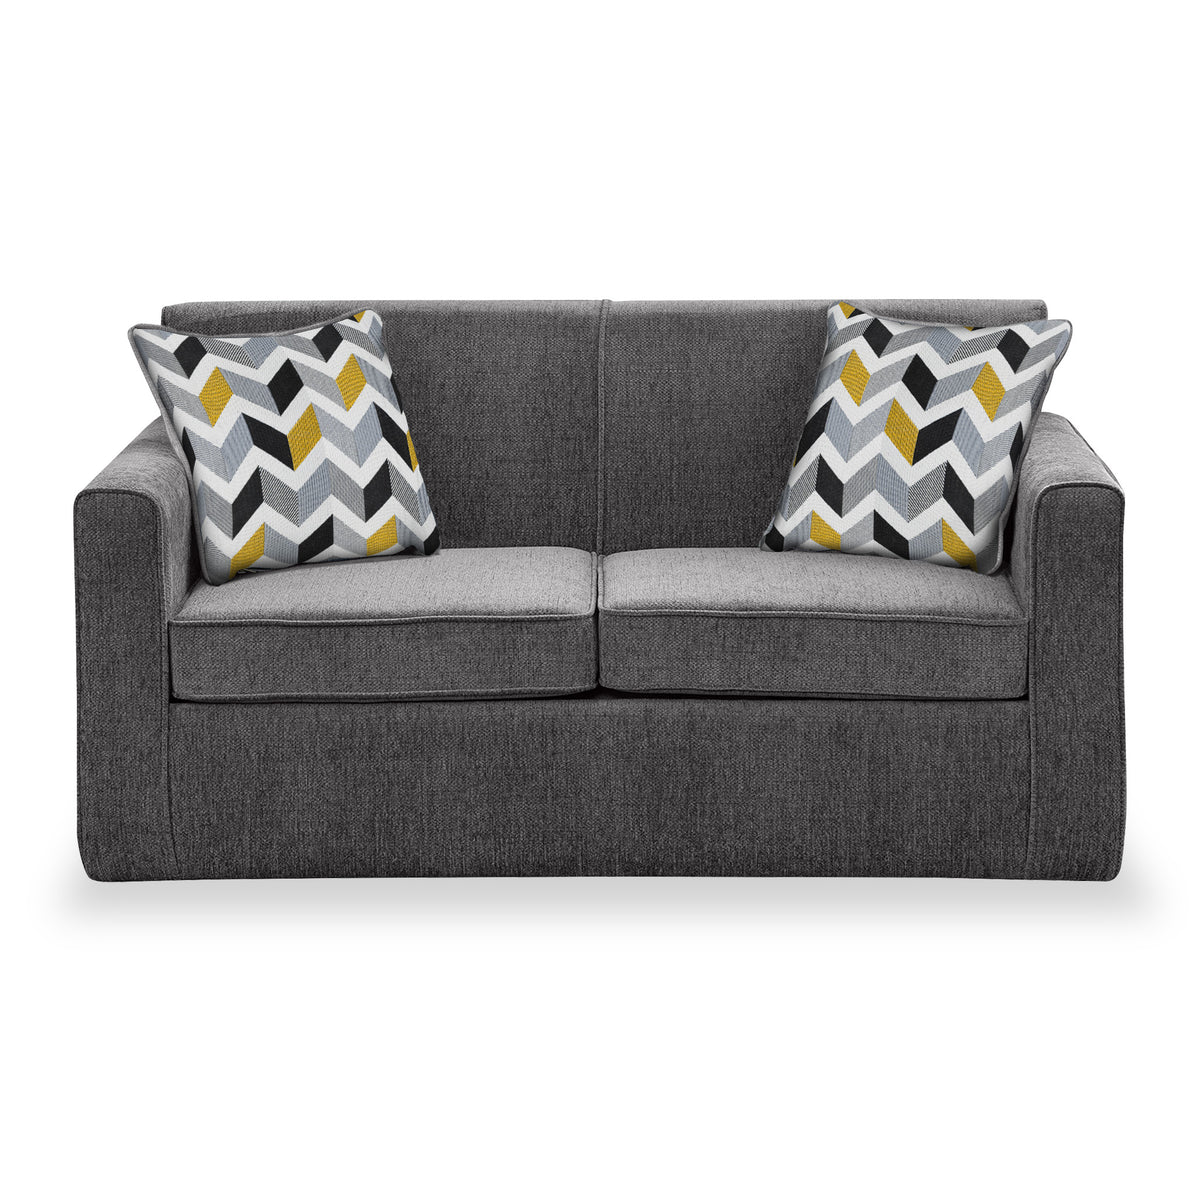 Welton Charcoal Soft Weave 2 Seater Sofa Bed with Morelisa Mustard Cushions